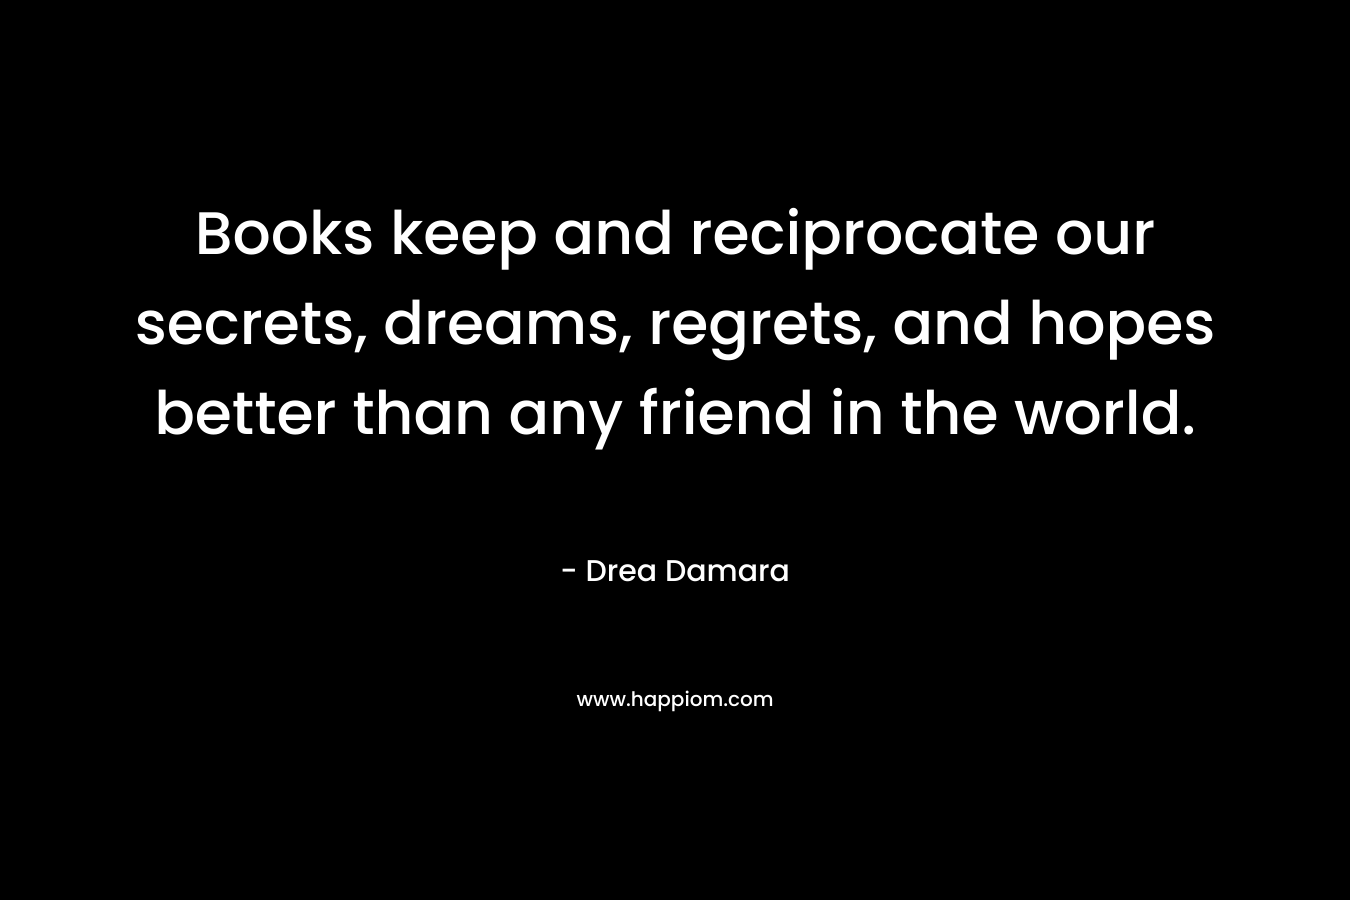 Books keep and reciprocate our secrets, dreams, regrets, and hopes better than any friend in the world. – Drea Damara